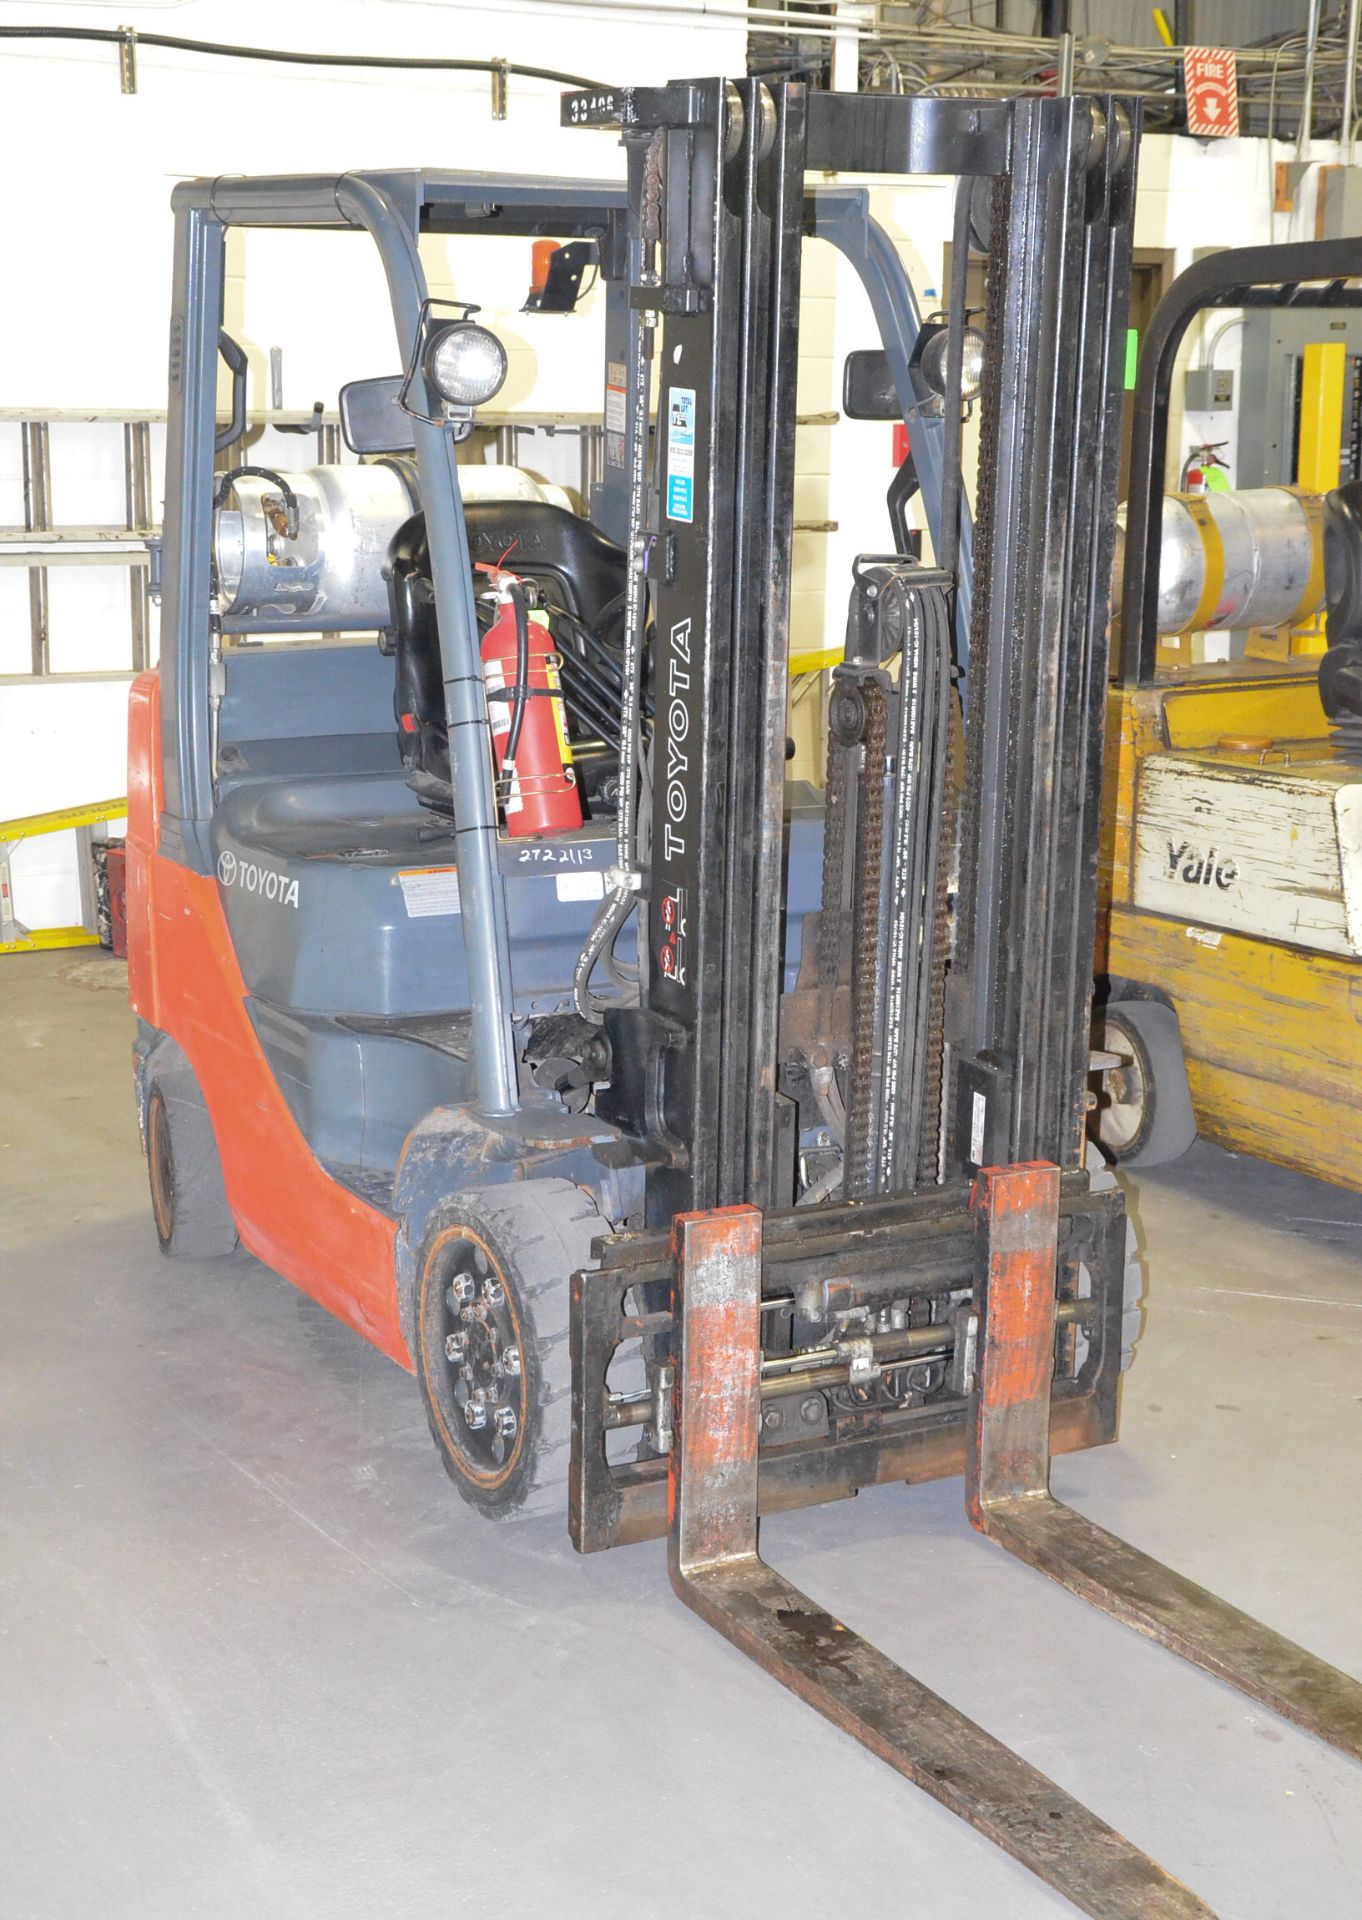 TOYOTA (2013) 8FGCU25 LPG FORKLIFT WITH 4800 LB. CAPACITY, 189" VERTICAL LIFT, 3 STAGE MAST, SOLID - Image 2 of 6